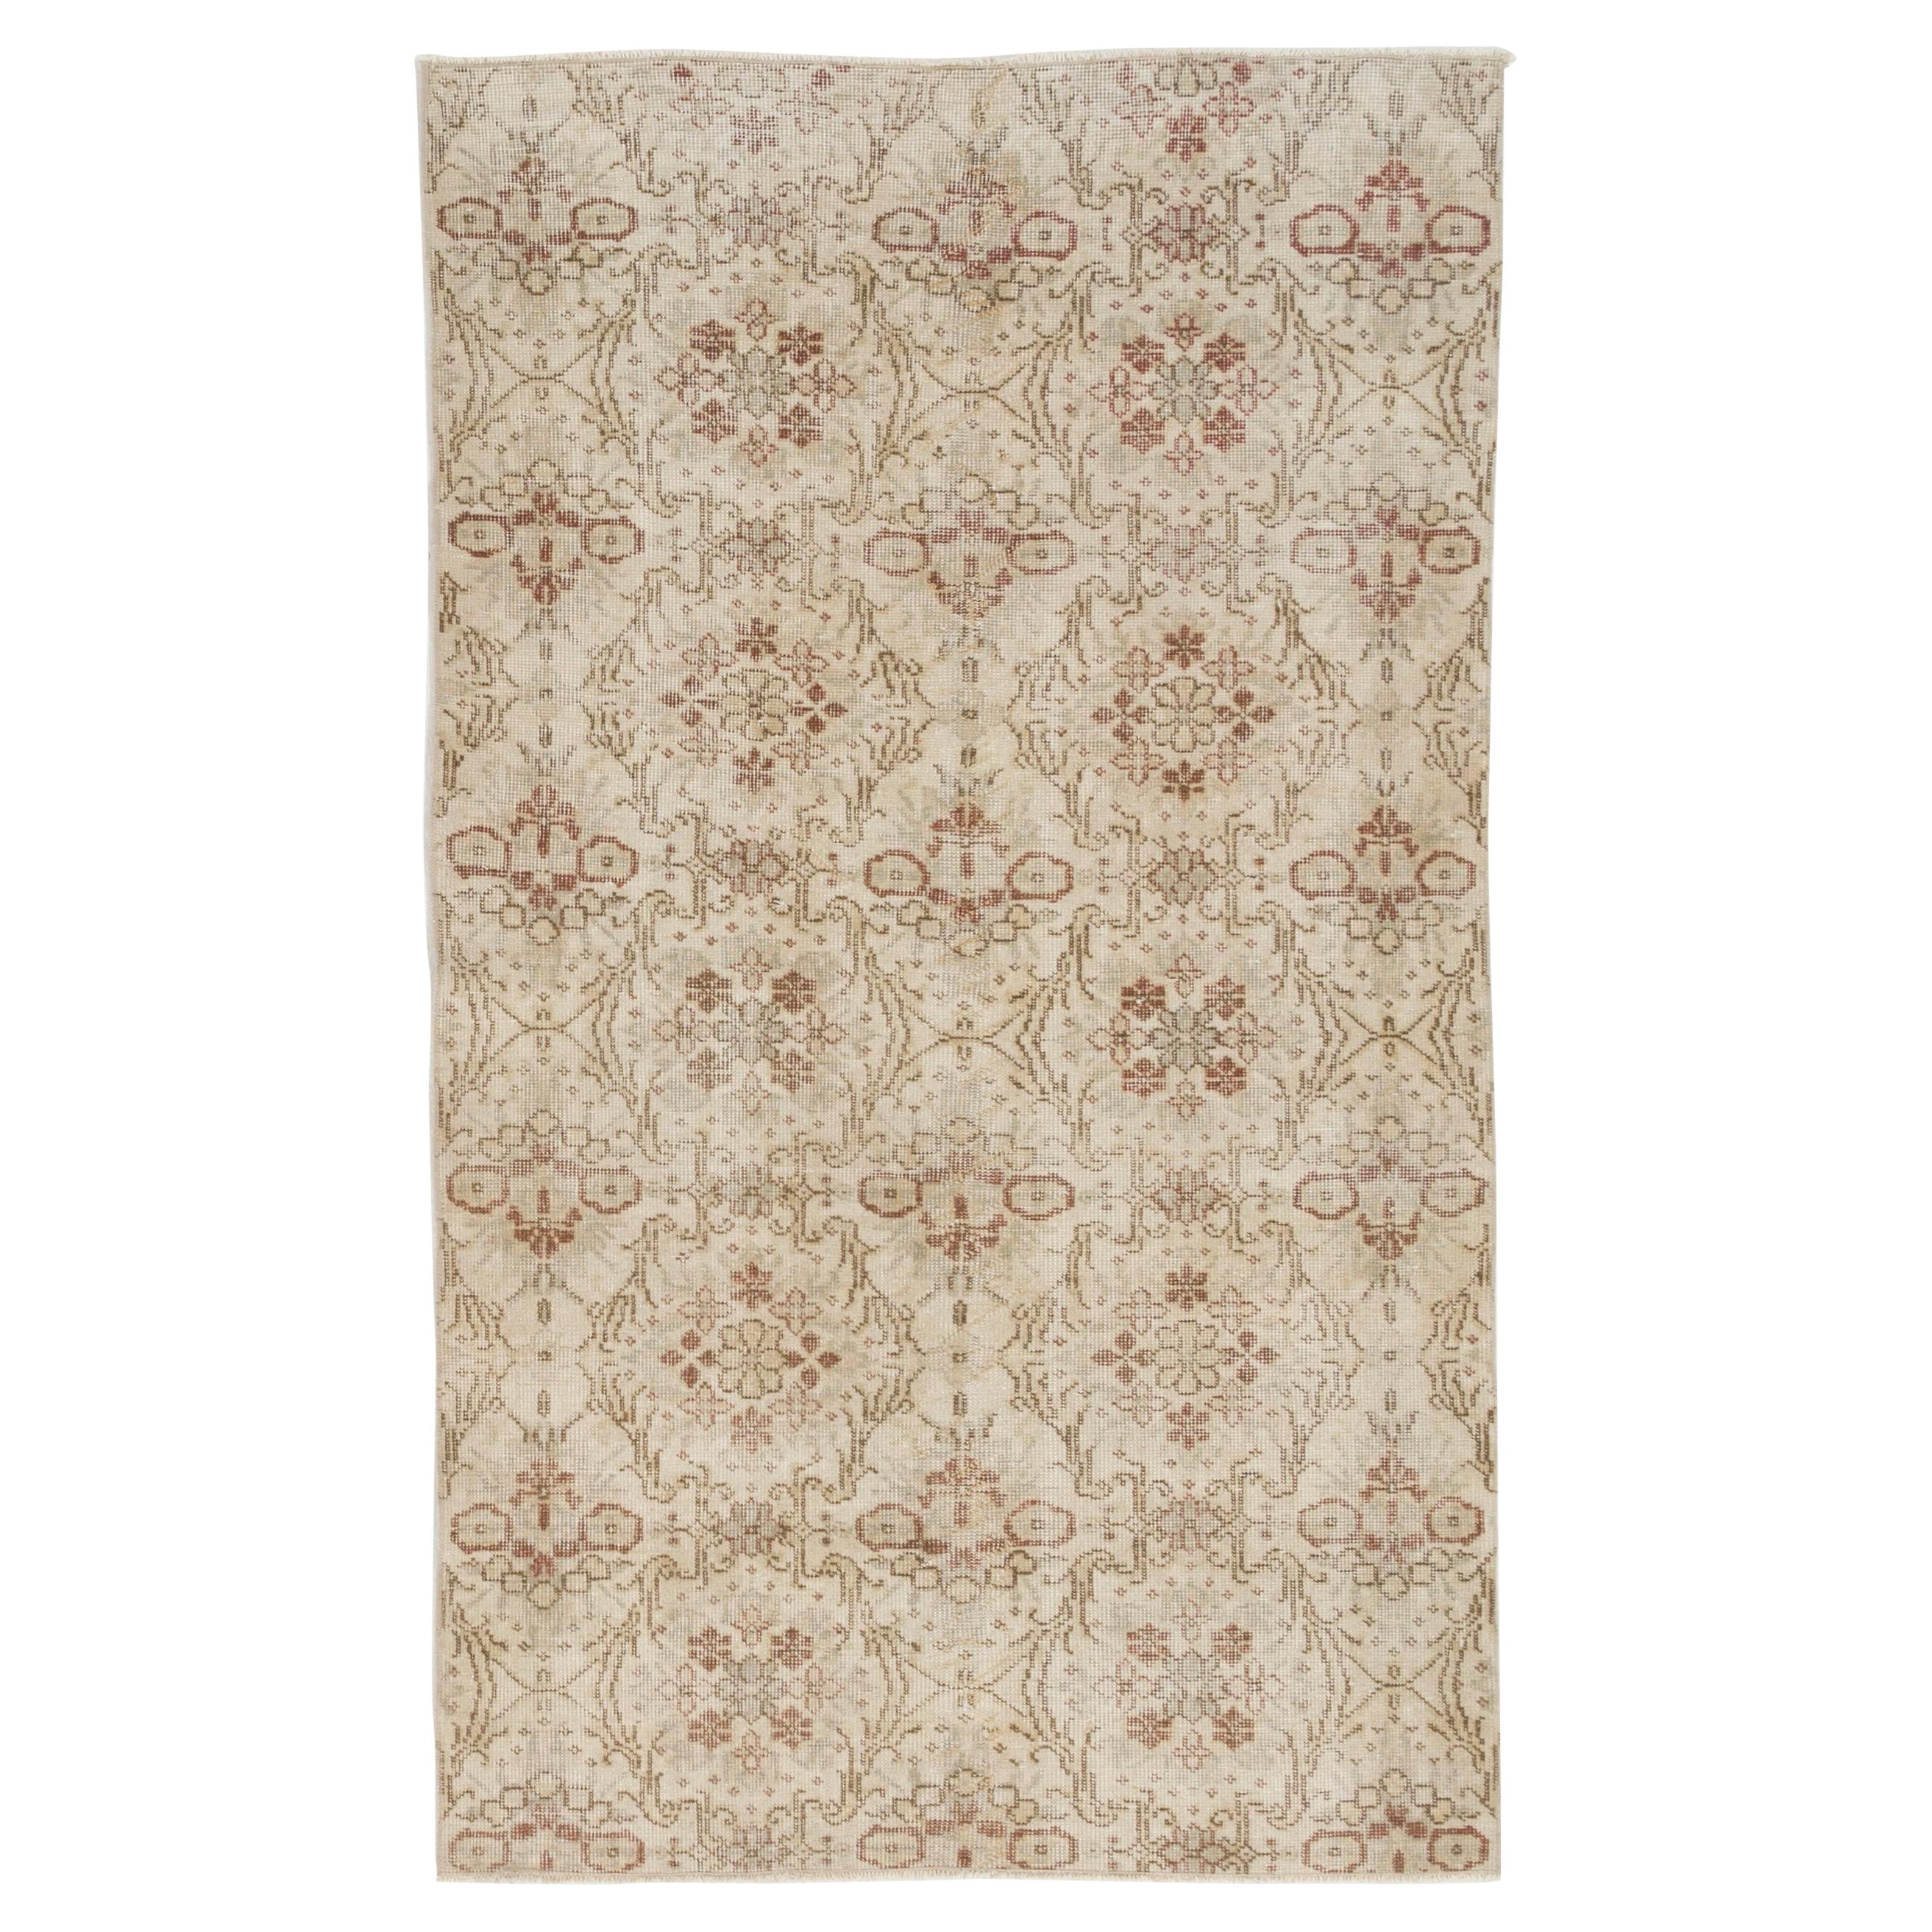 4x6.8 ft Hand-Knotted Vintage Turkish Oushak Accent Rug with Floral Design For Sale